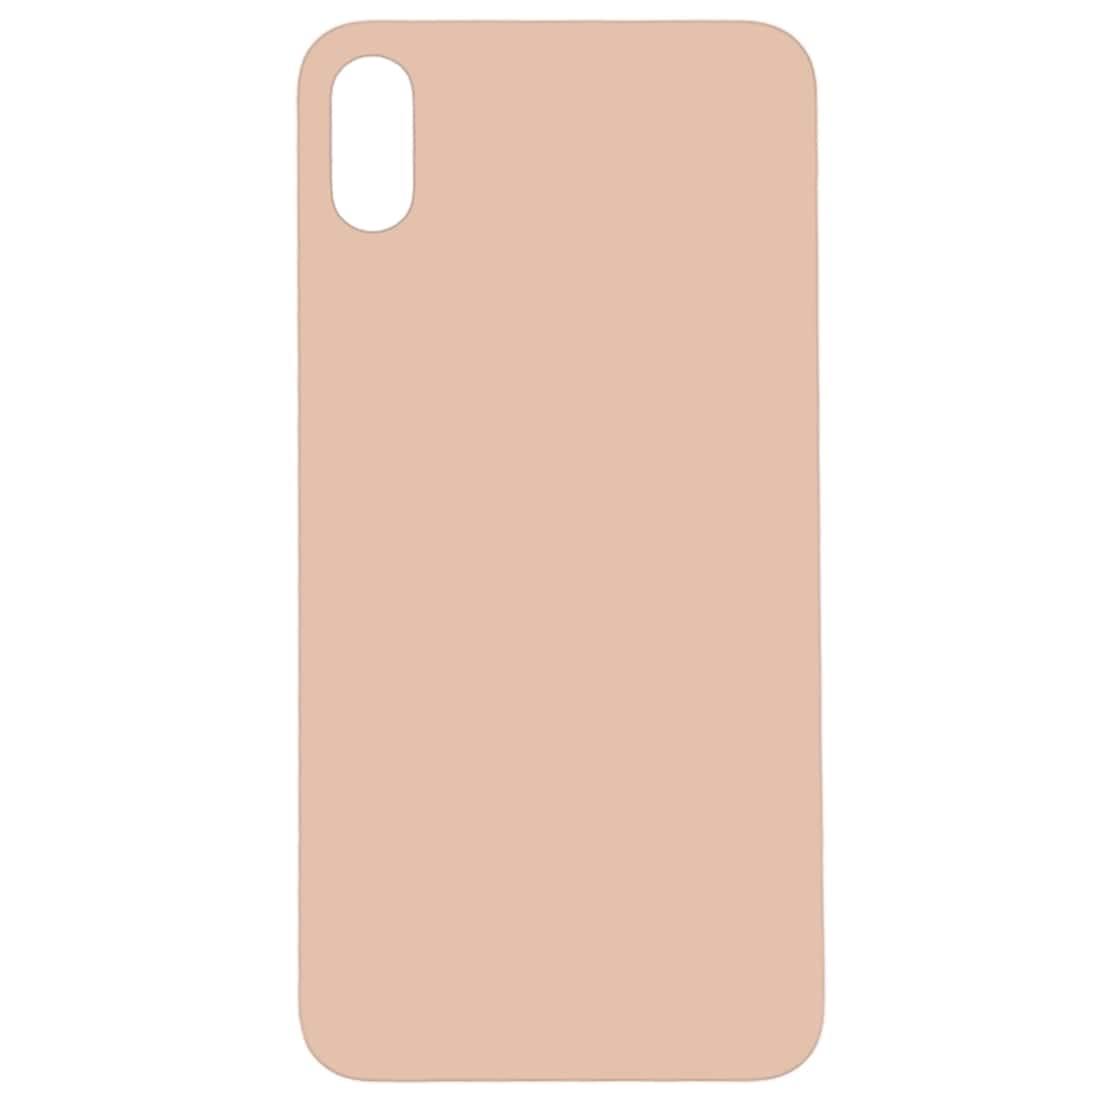 Back Glass Panel for  iPhone XS Max Gold